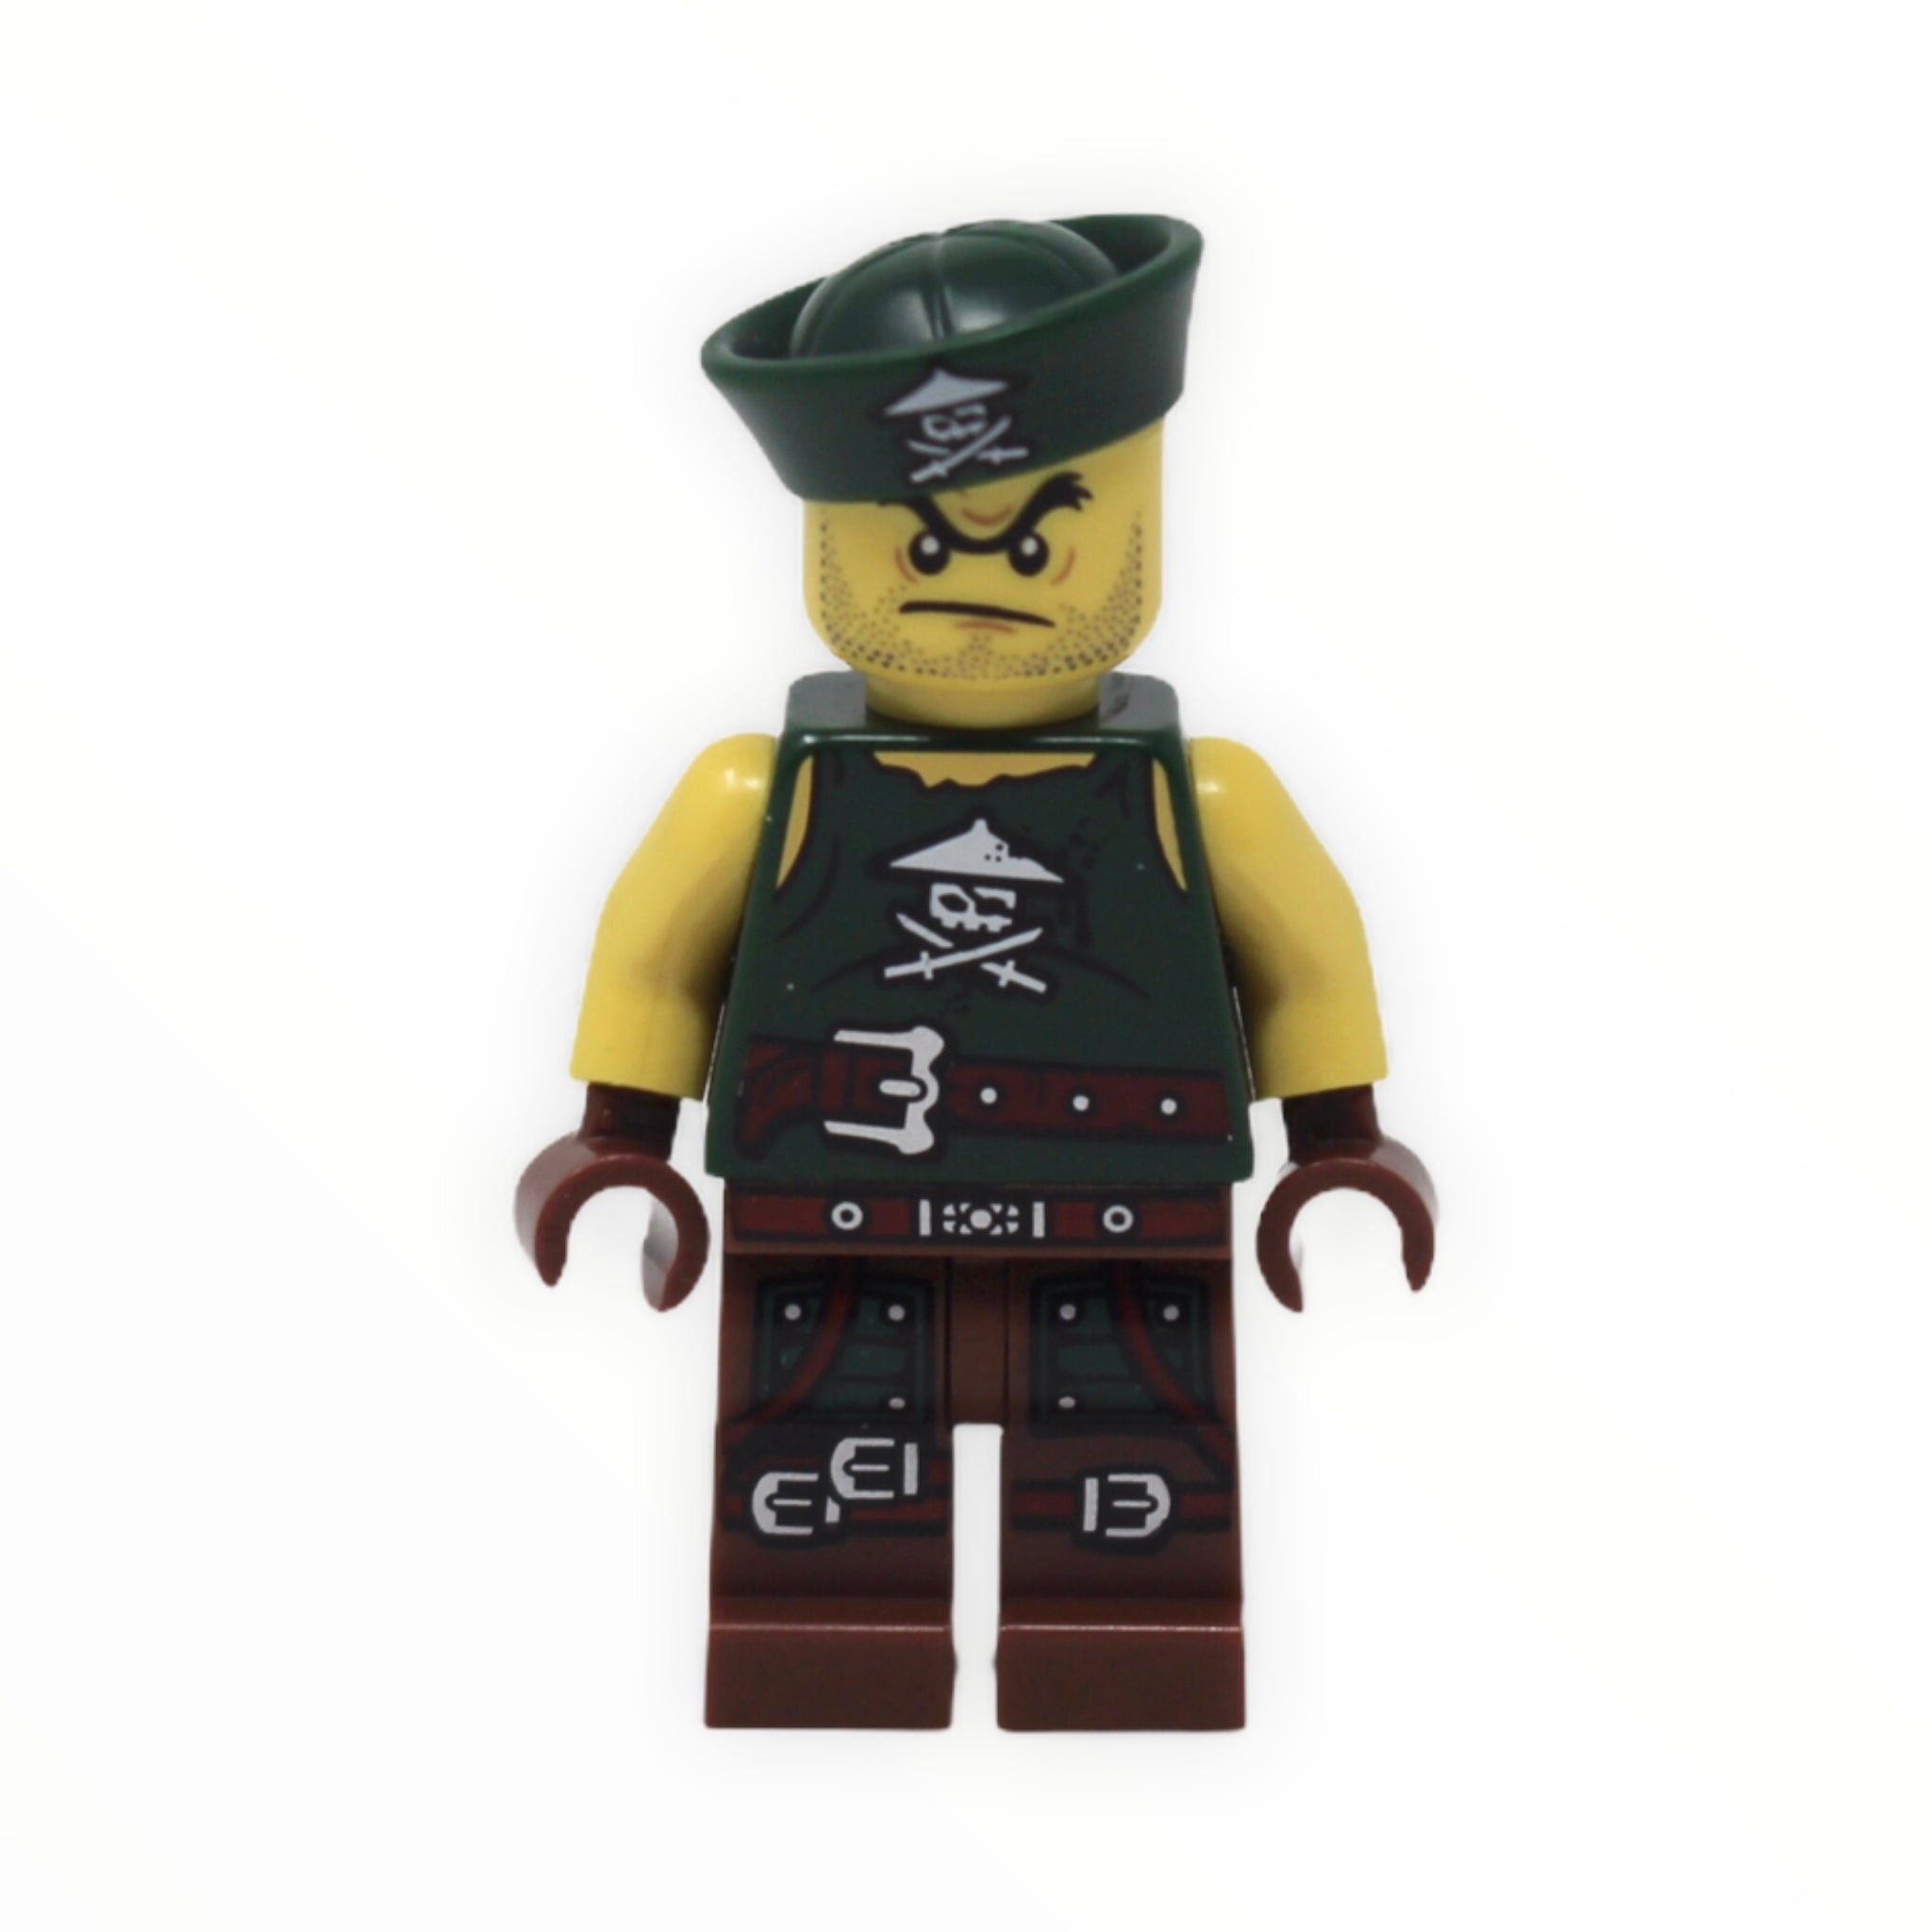 Sky Pirate Foot Soldier (sailor hat)